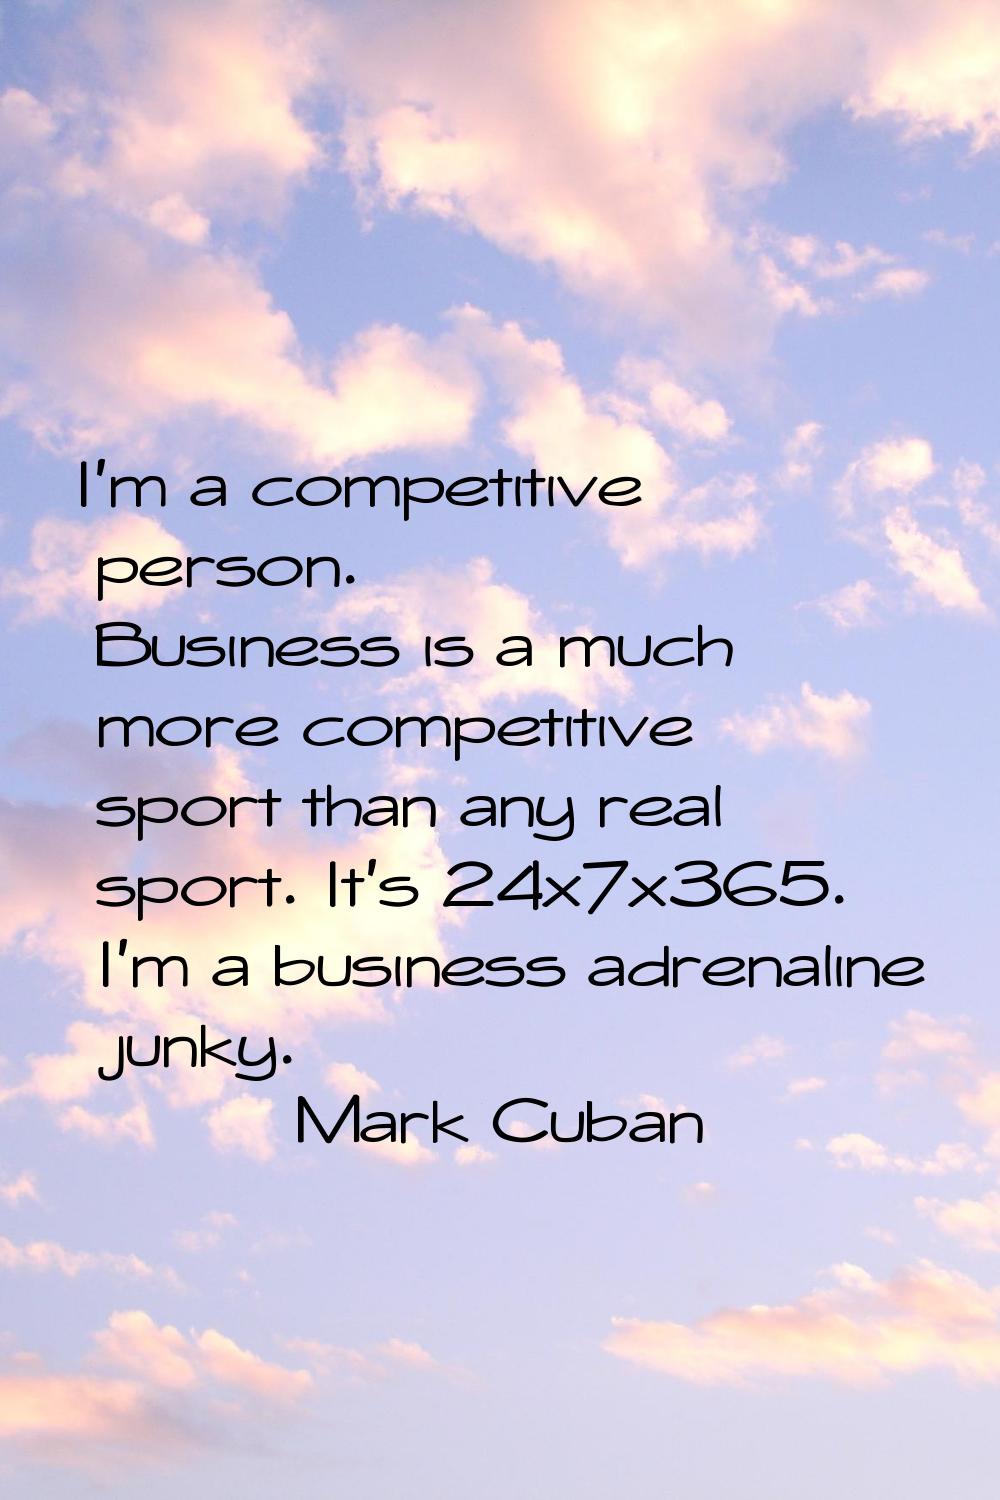 I'm a competitive person. Business is a much more competitive sport than any real sport. It's 24x7x